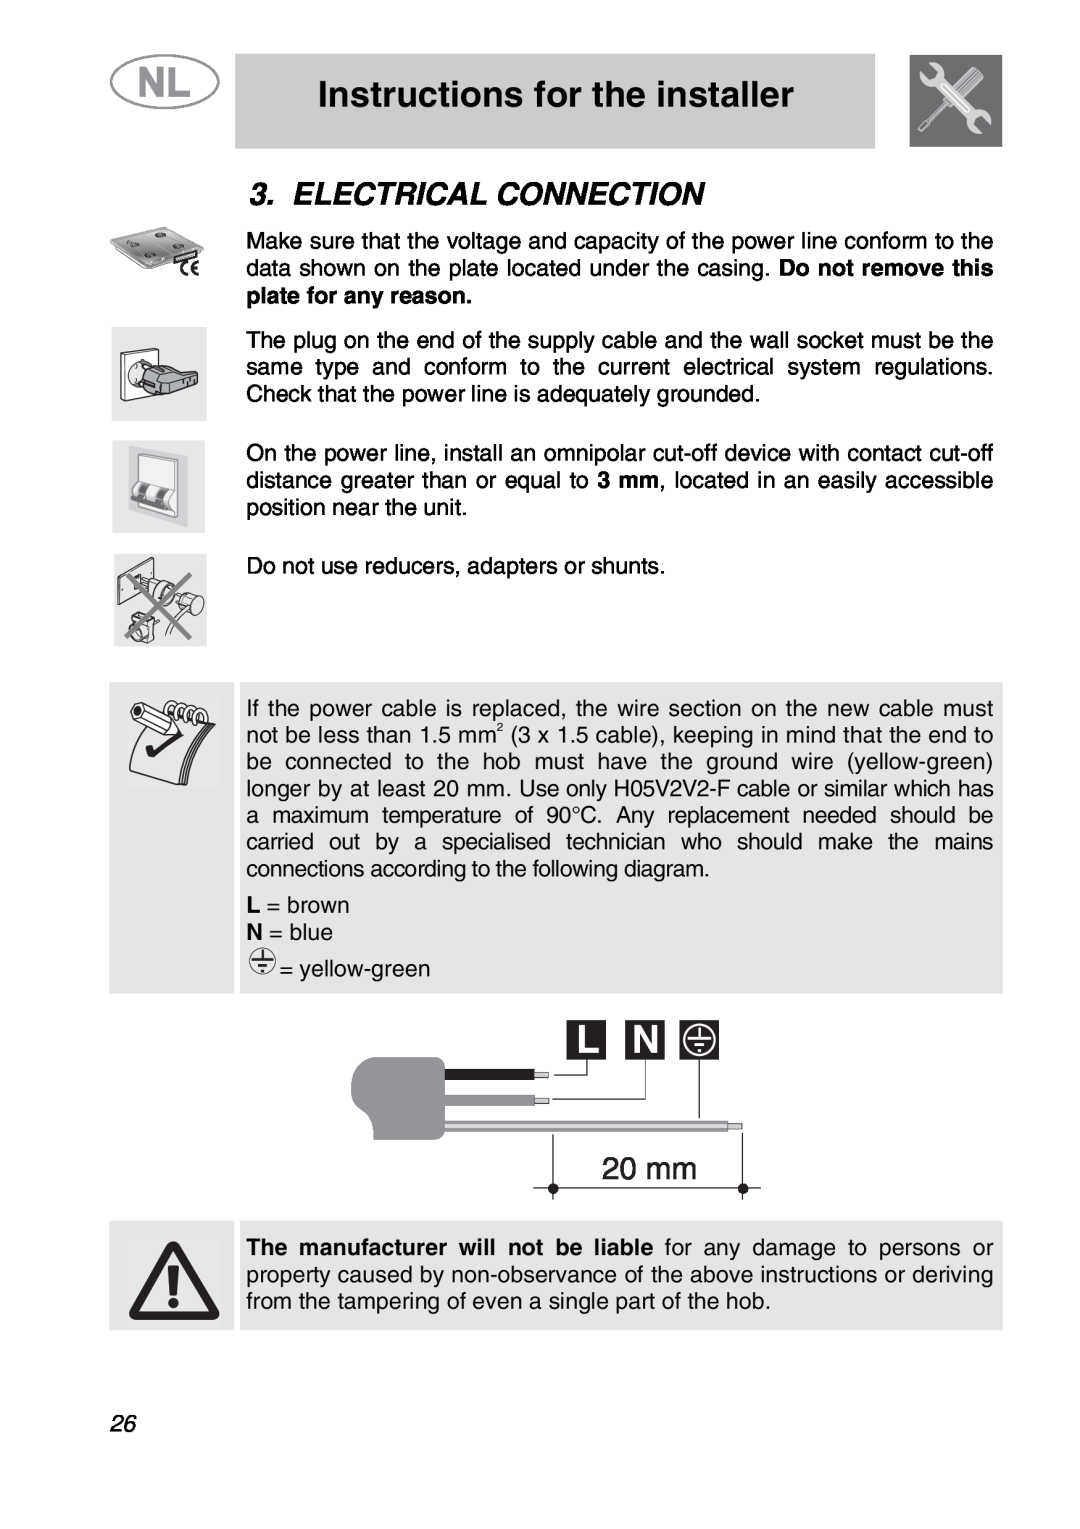 Smeg GKDCO15, GKCO64-3 manual Electrical Connection, Instructions for the installer, plate for any reason 